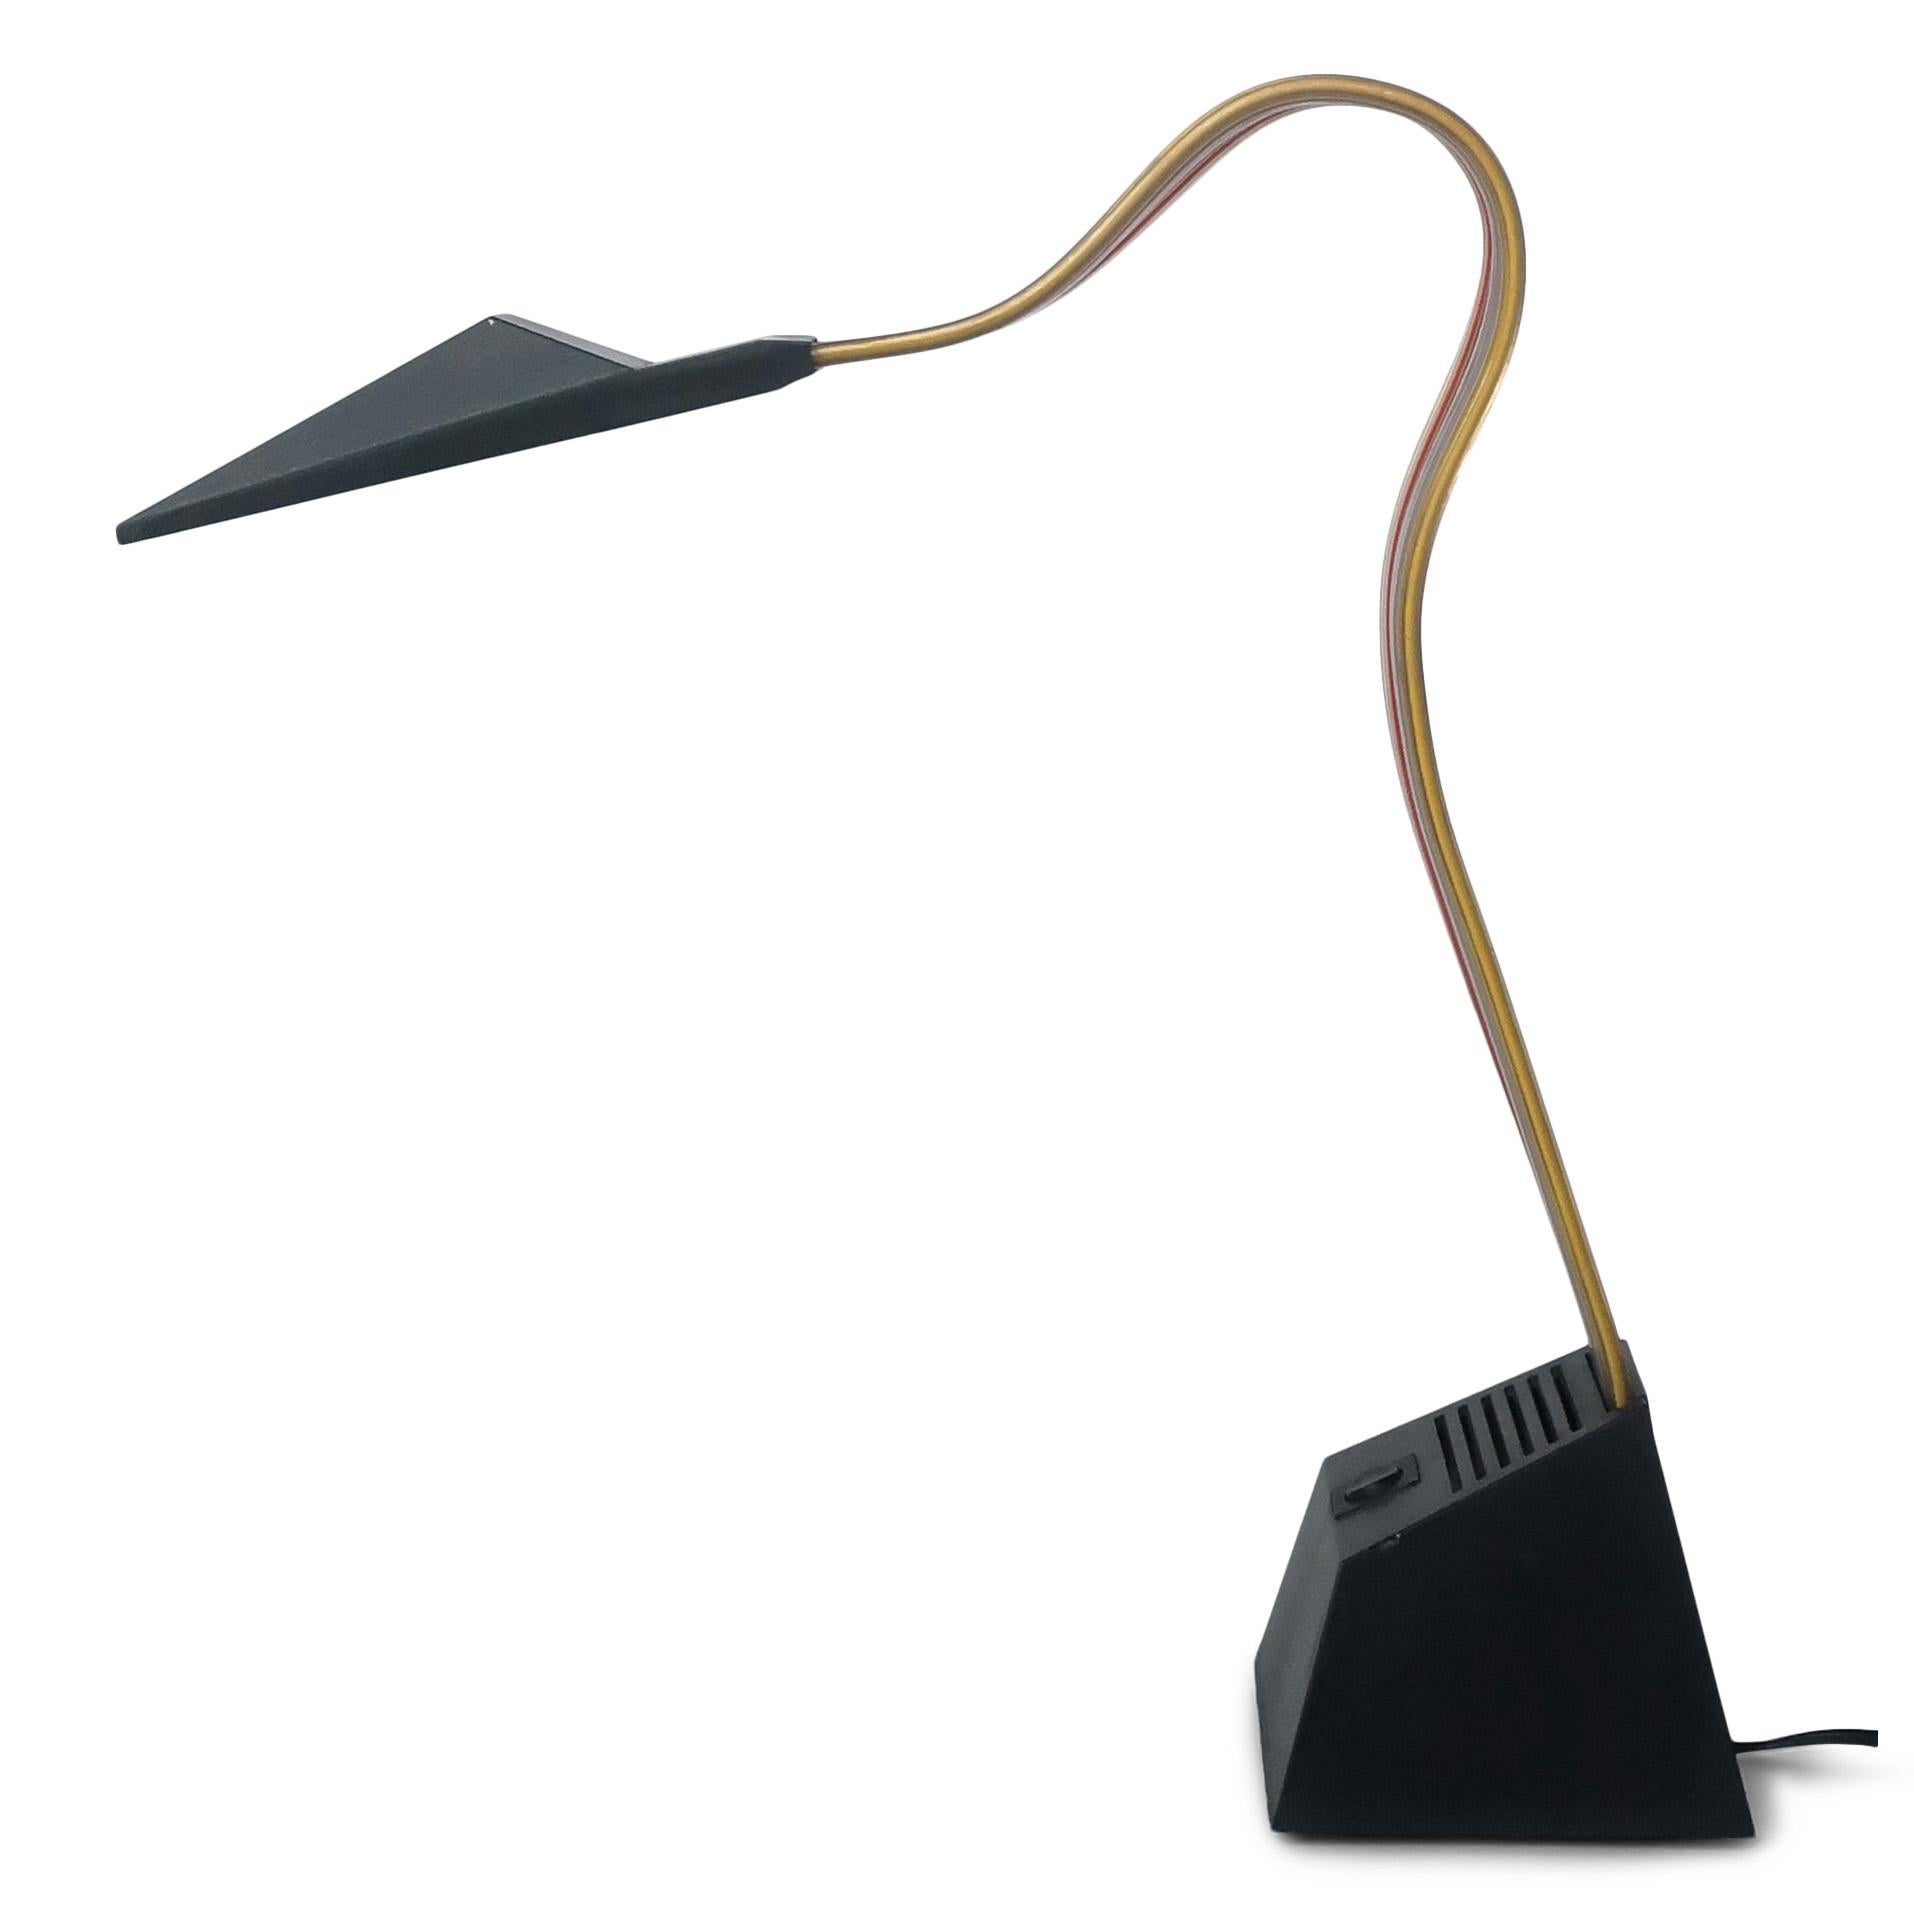 A quintessentially postmodern table lamp, the Nastro was designed by Alberto Fraser for Stilnovo in 1983. Made in Italy, it has a weighted black plastic base, black plastic shade and a rainbow striped flexible and bendable PVC stem. Alberto Fraser